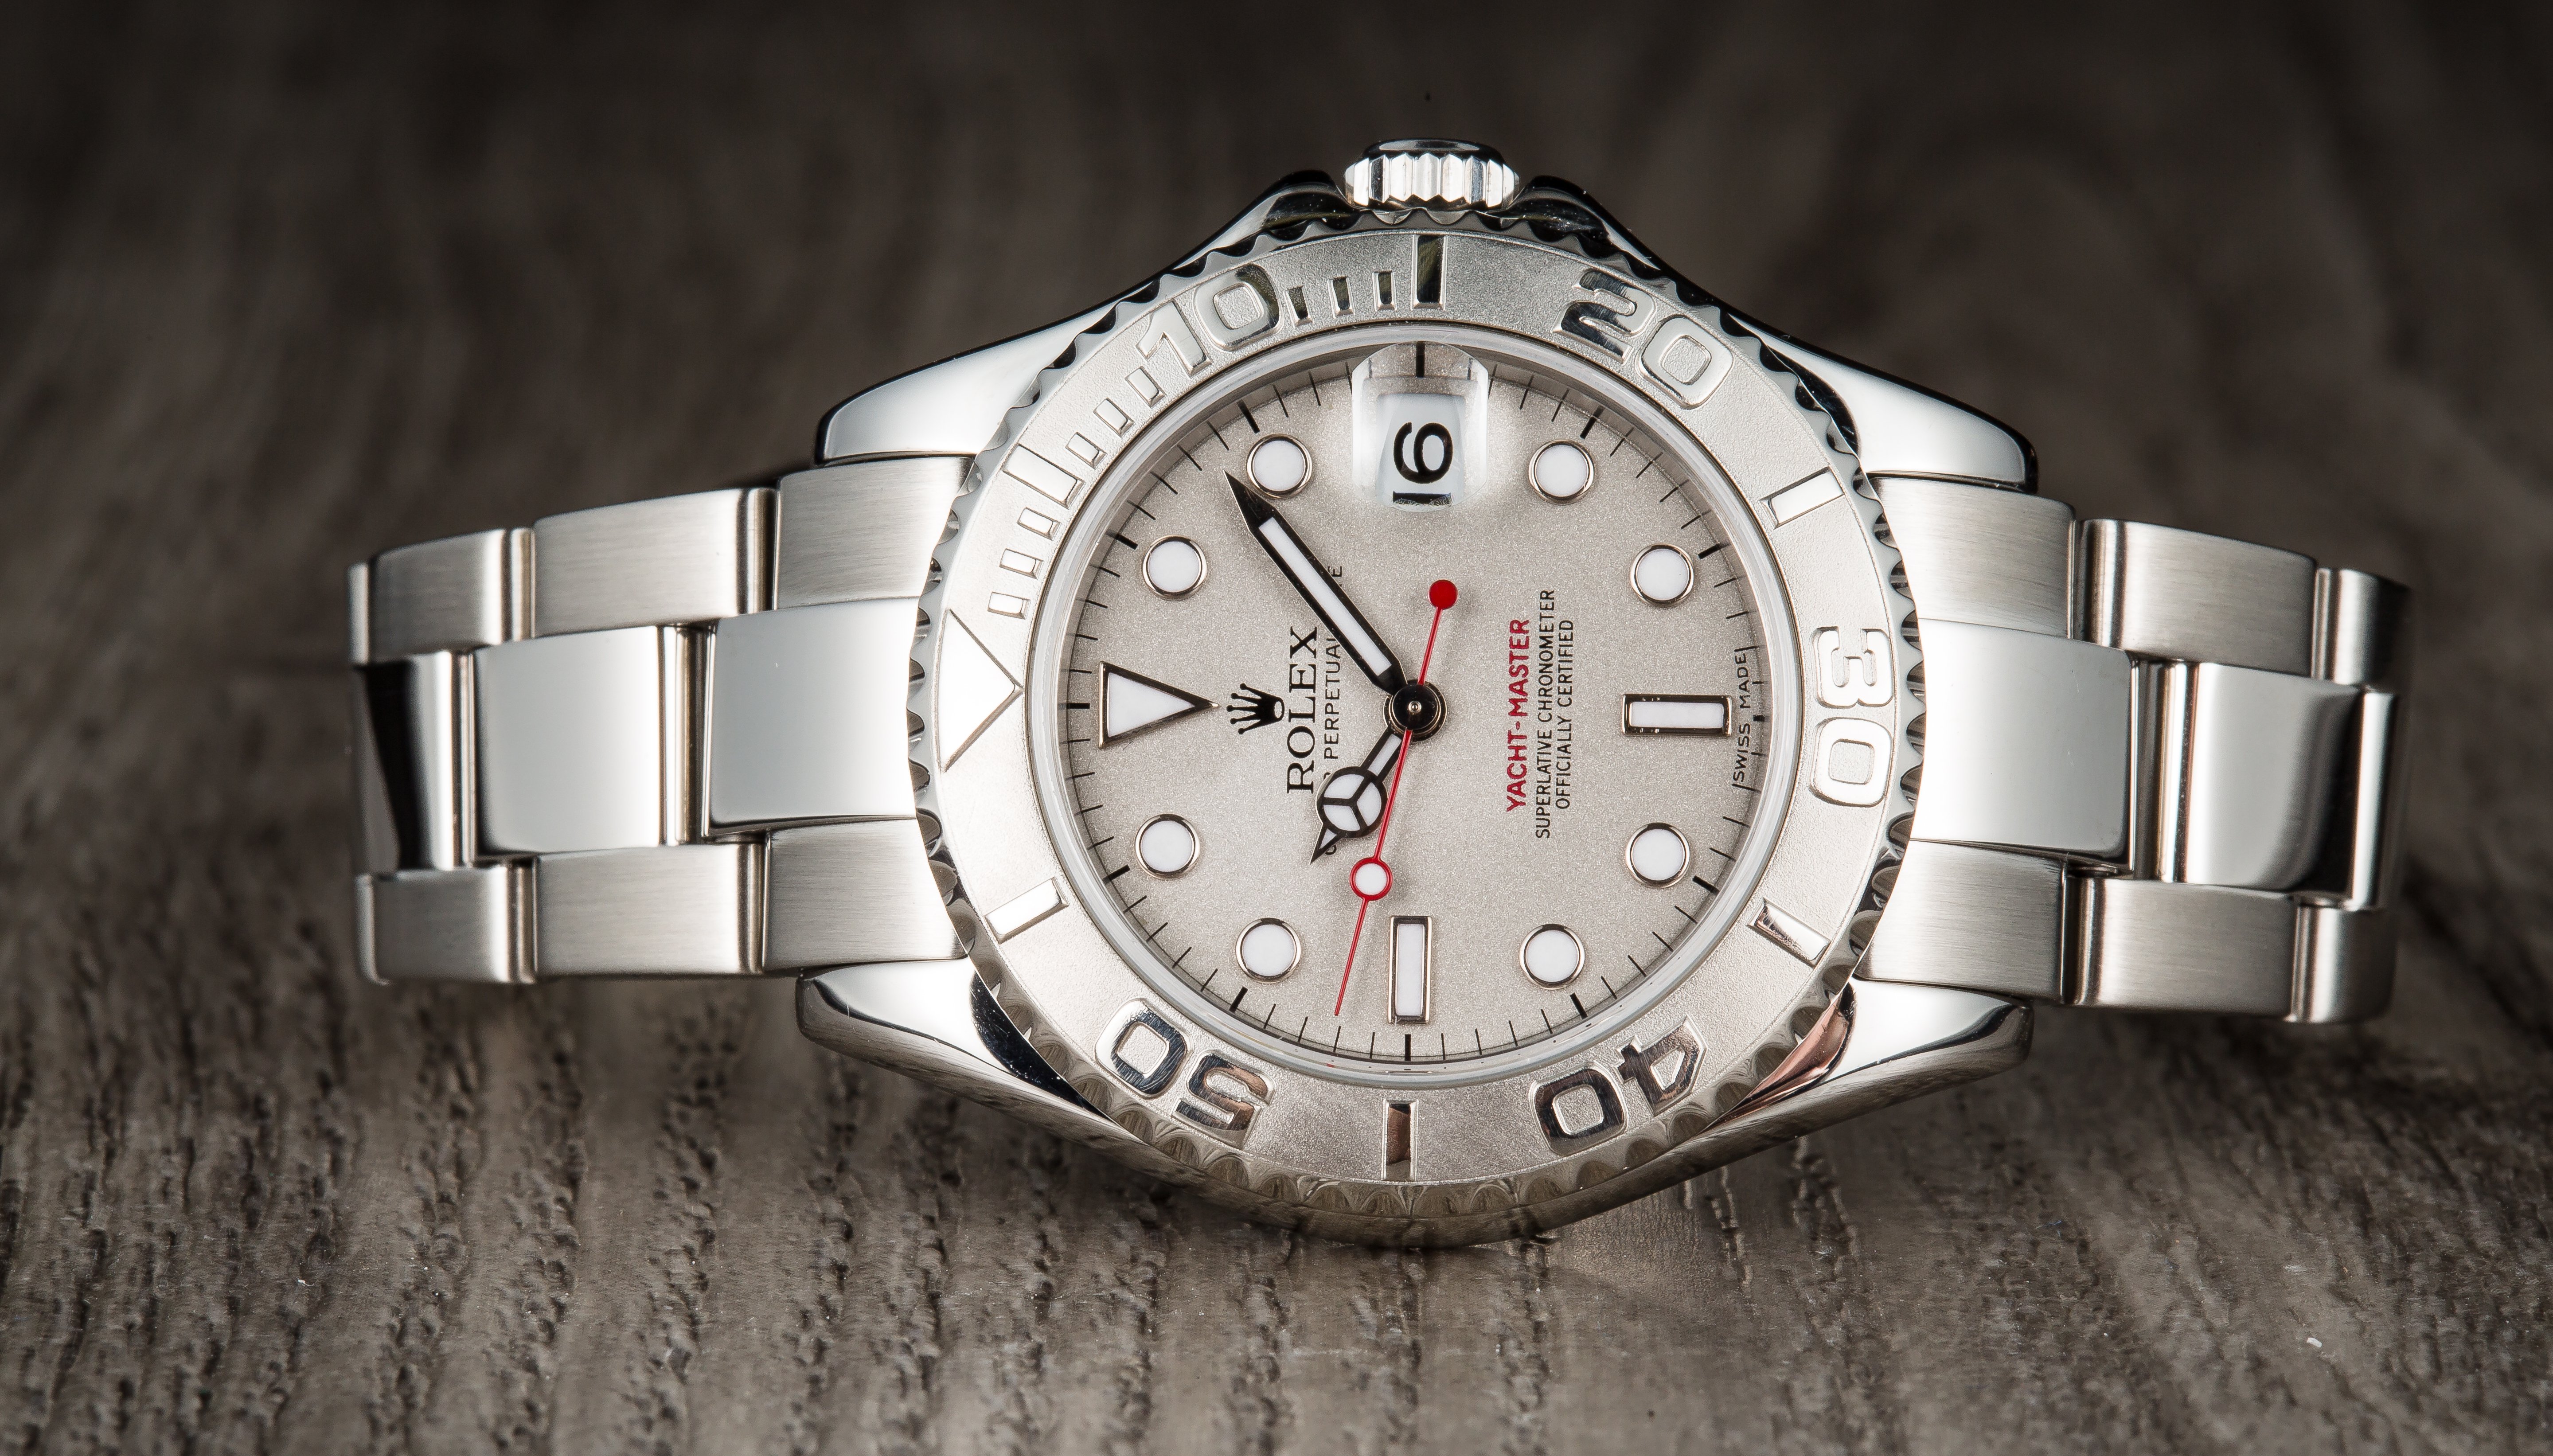 Collectors should have a Yacht-Master.